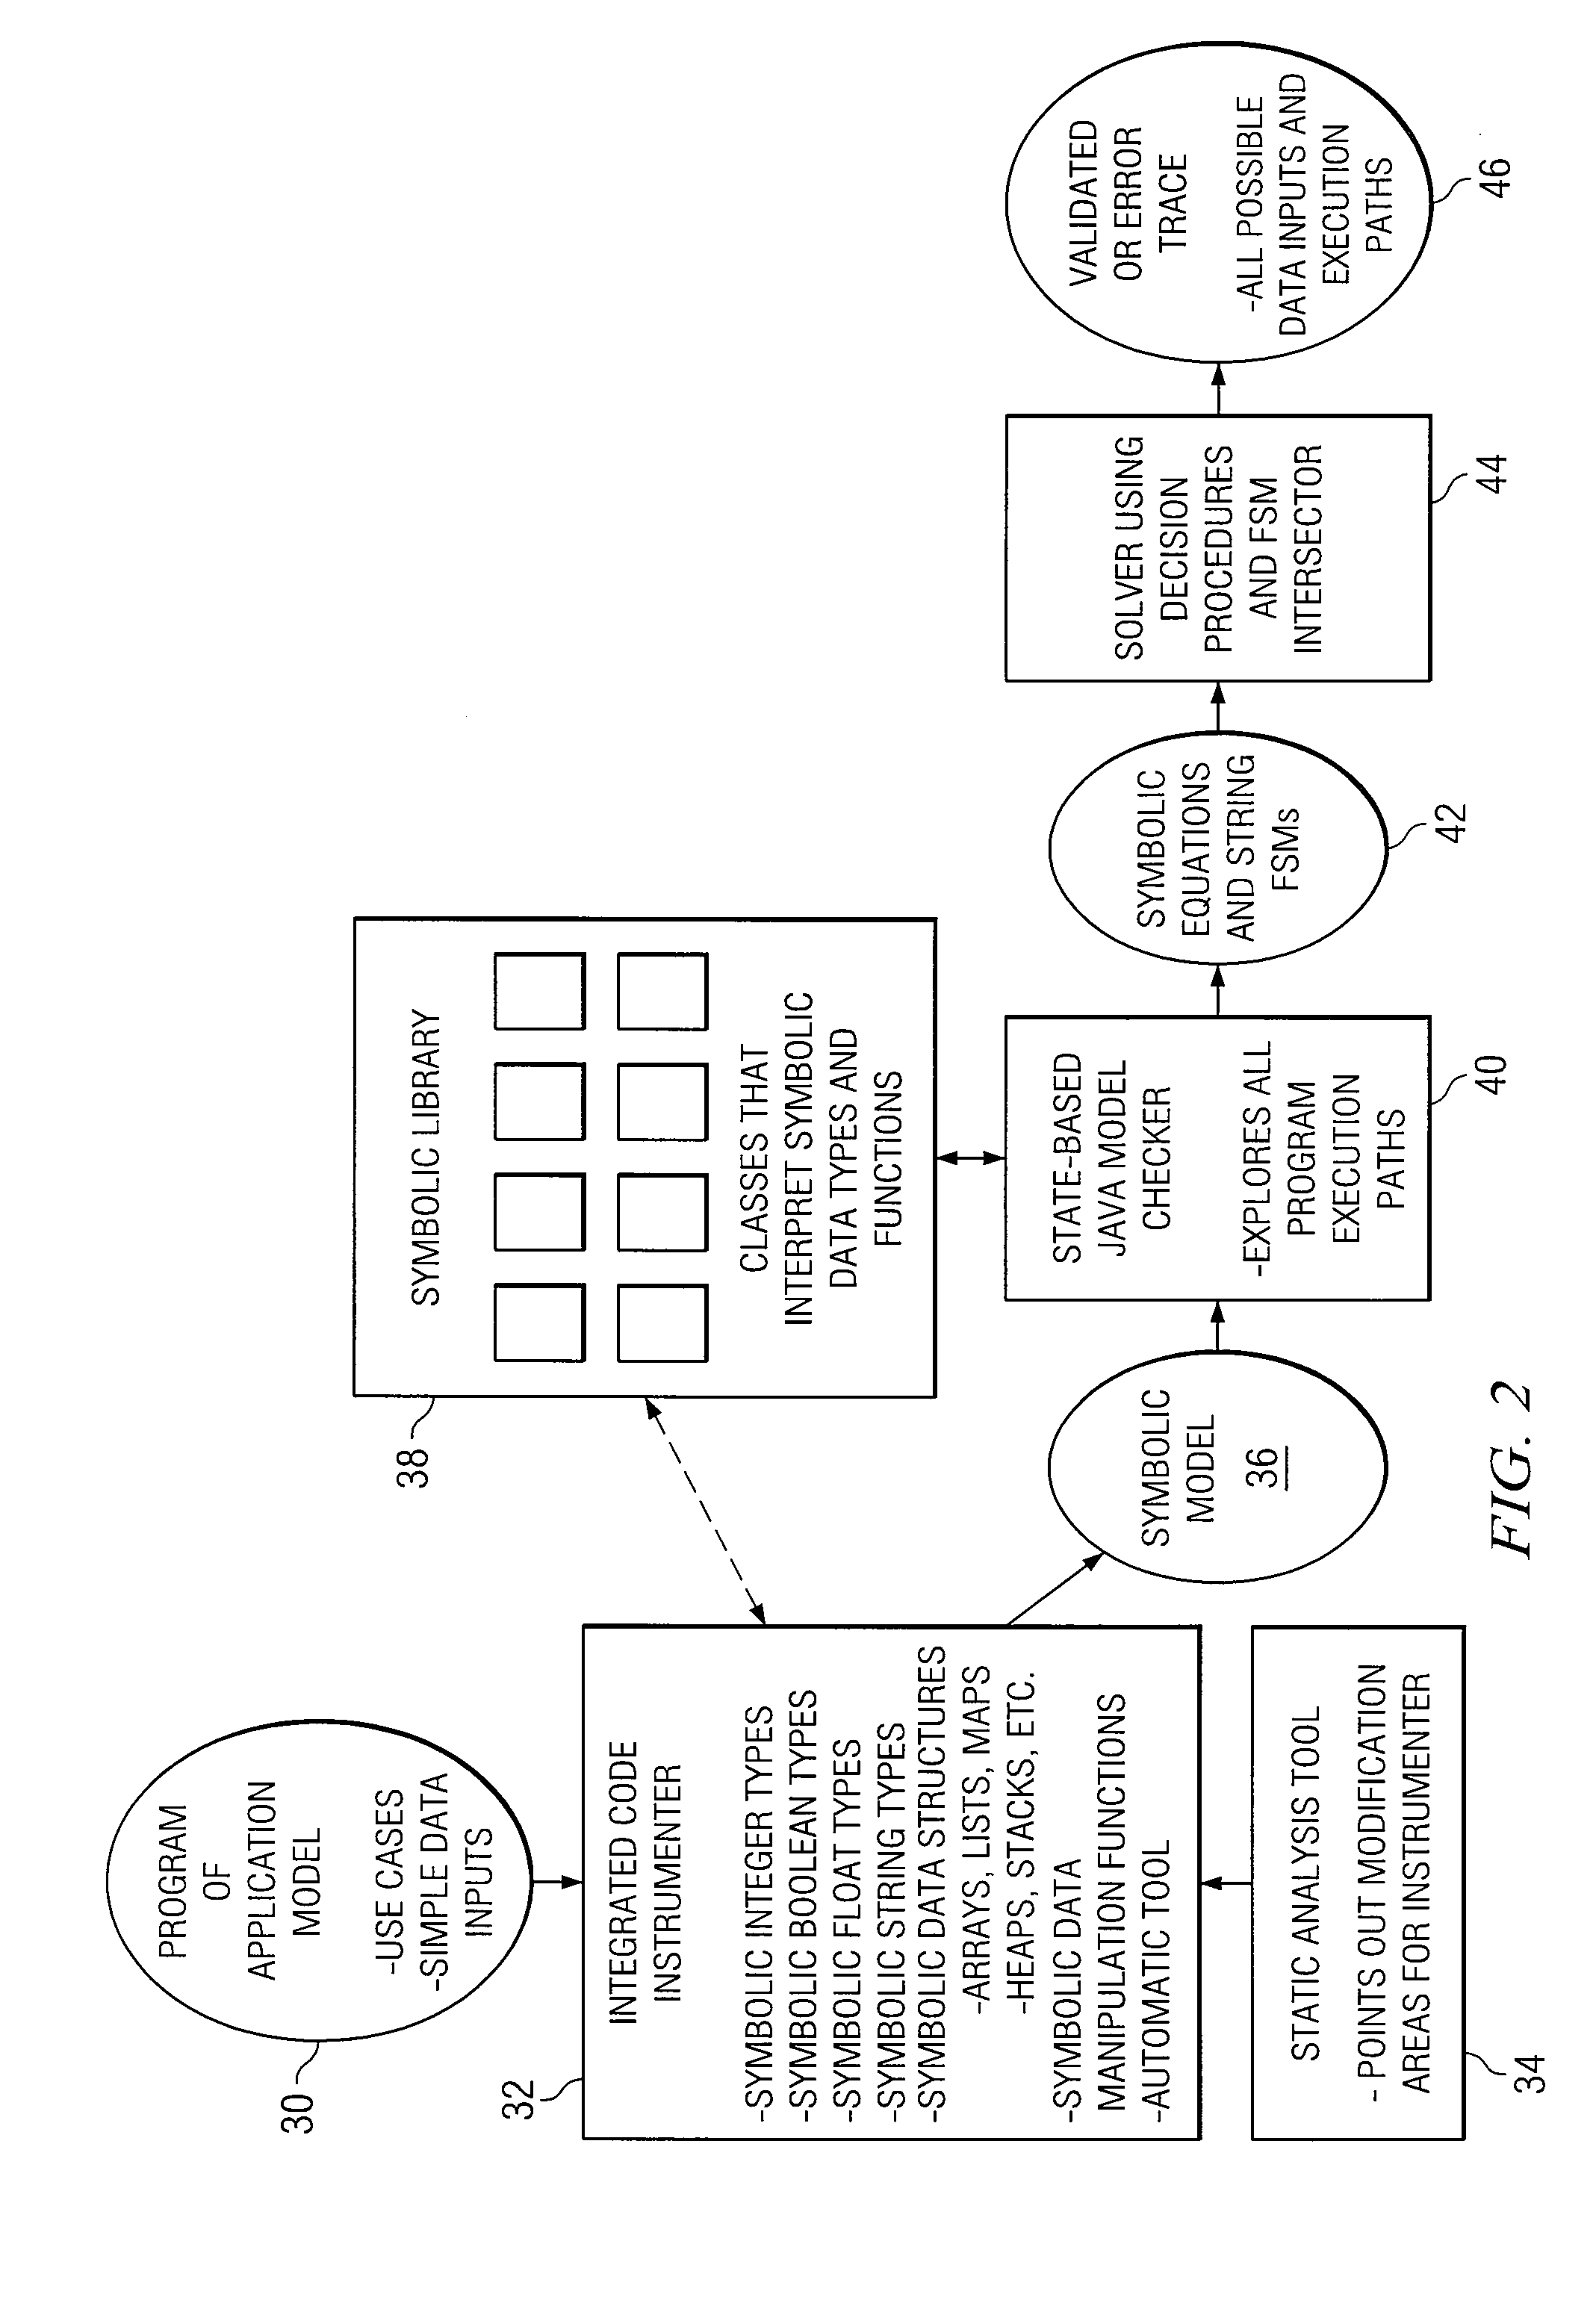 System and Method for Providing Symbolic Execution Engine for Validating Web Applications